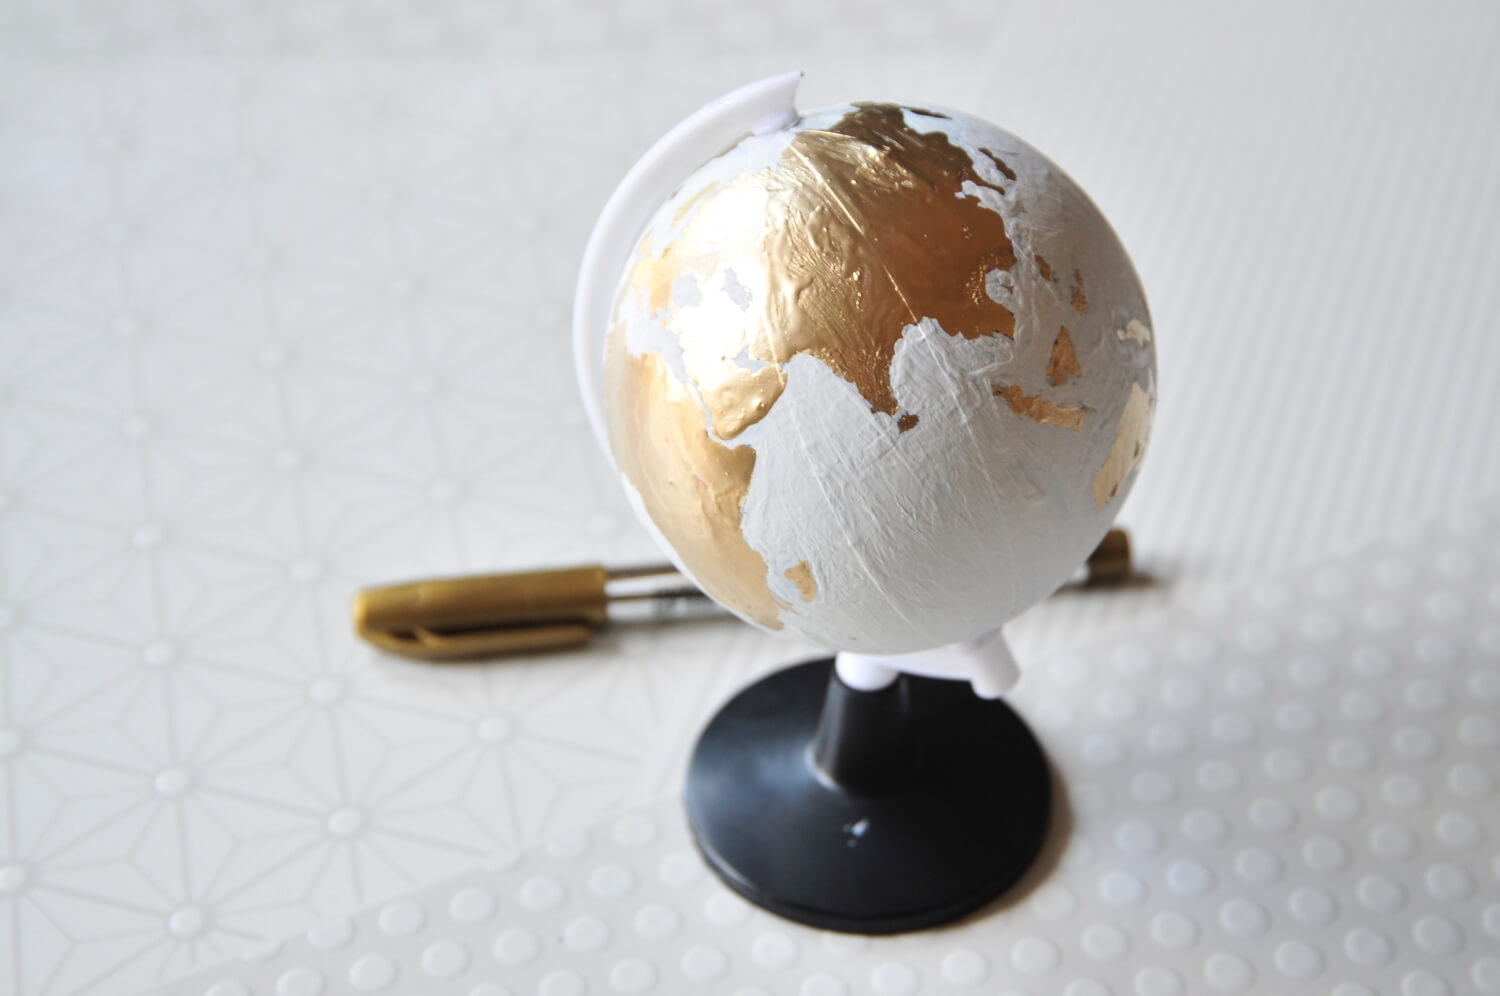 how to hand paint a chalkboard globe art subscription box tutorial